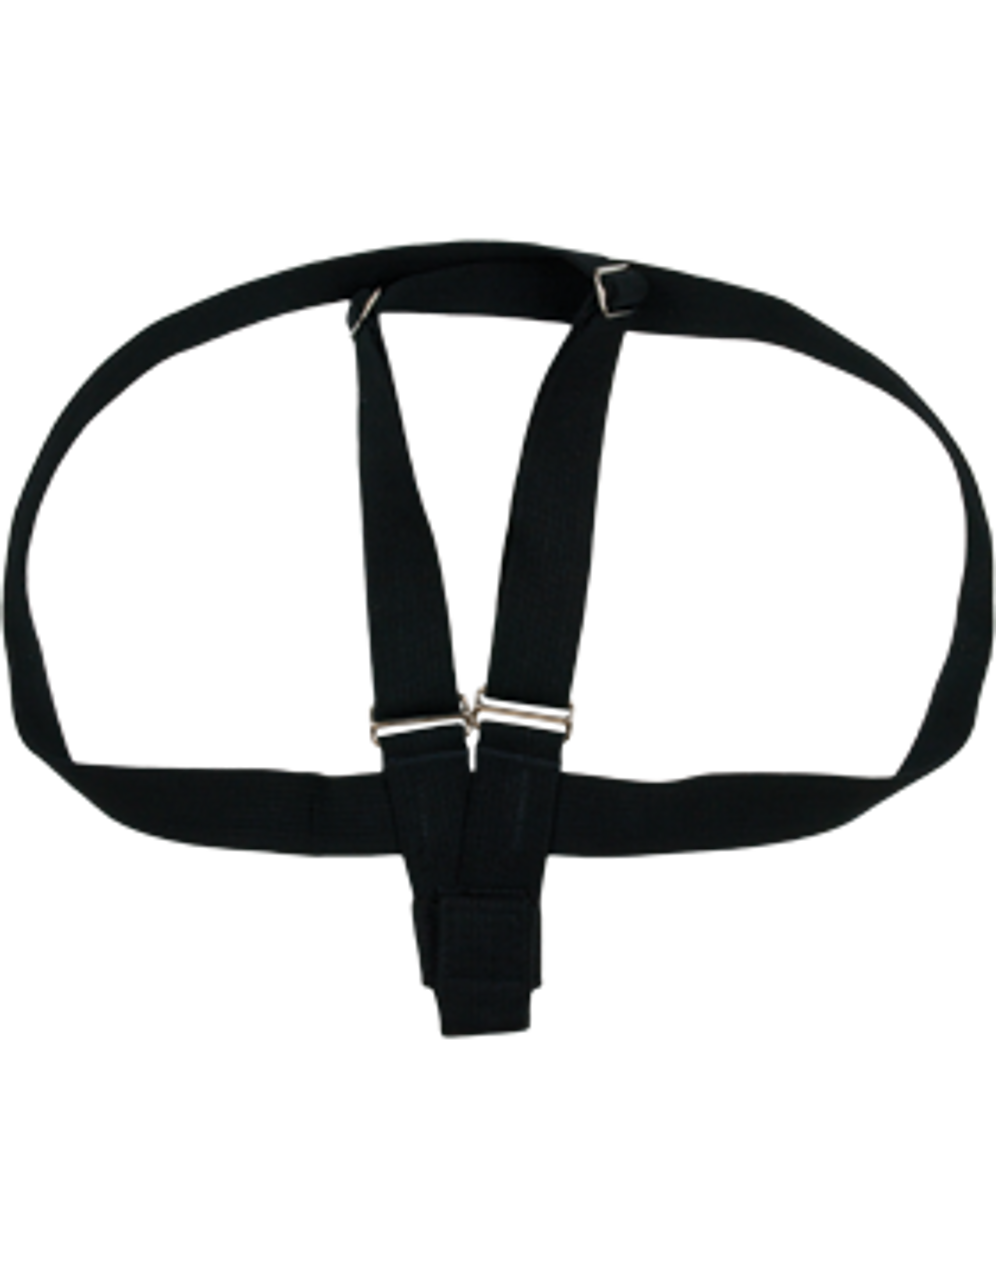 Flag Carrier, Double Strap Black Web with Web Cup, F-C307, FC307